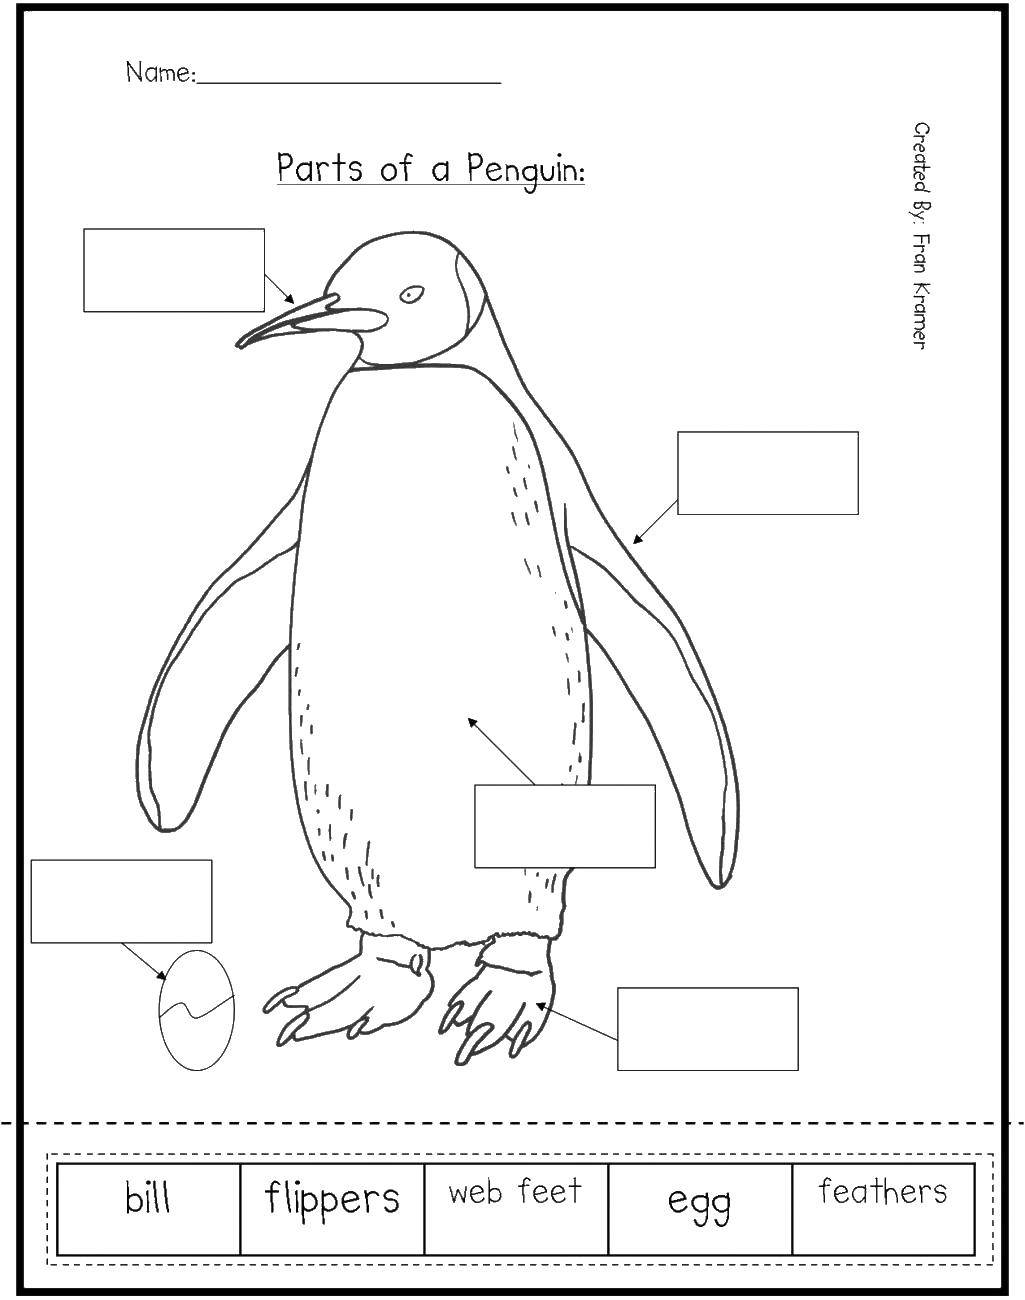 Coloring Part of the penguin. Category Animals. Tags:  that part penguin, English.